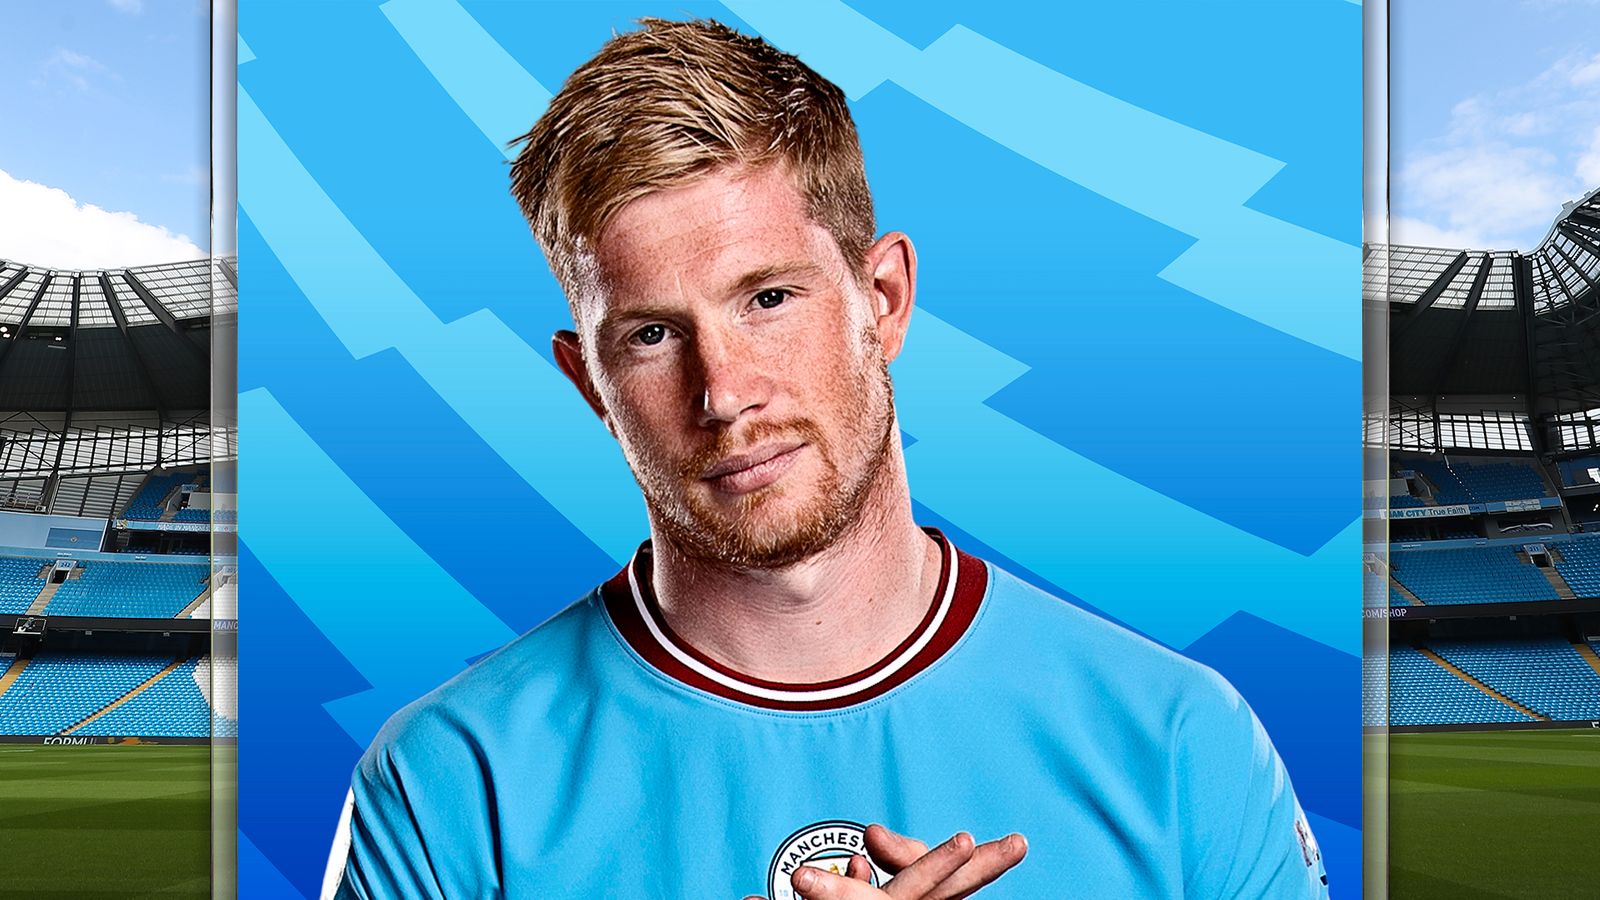 Kevin De Bruyne’s change of role since Erling Haaland came to Man City shows why he is so important for Pep Guardiola